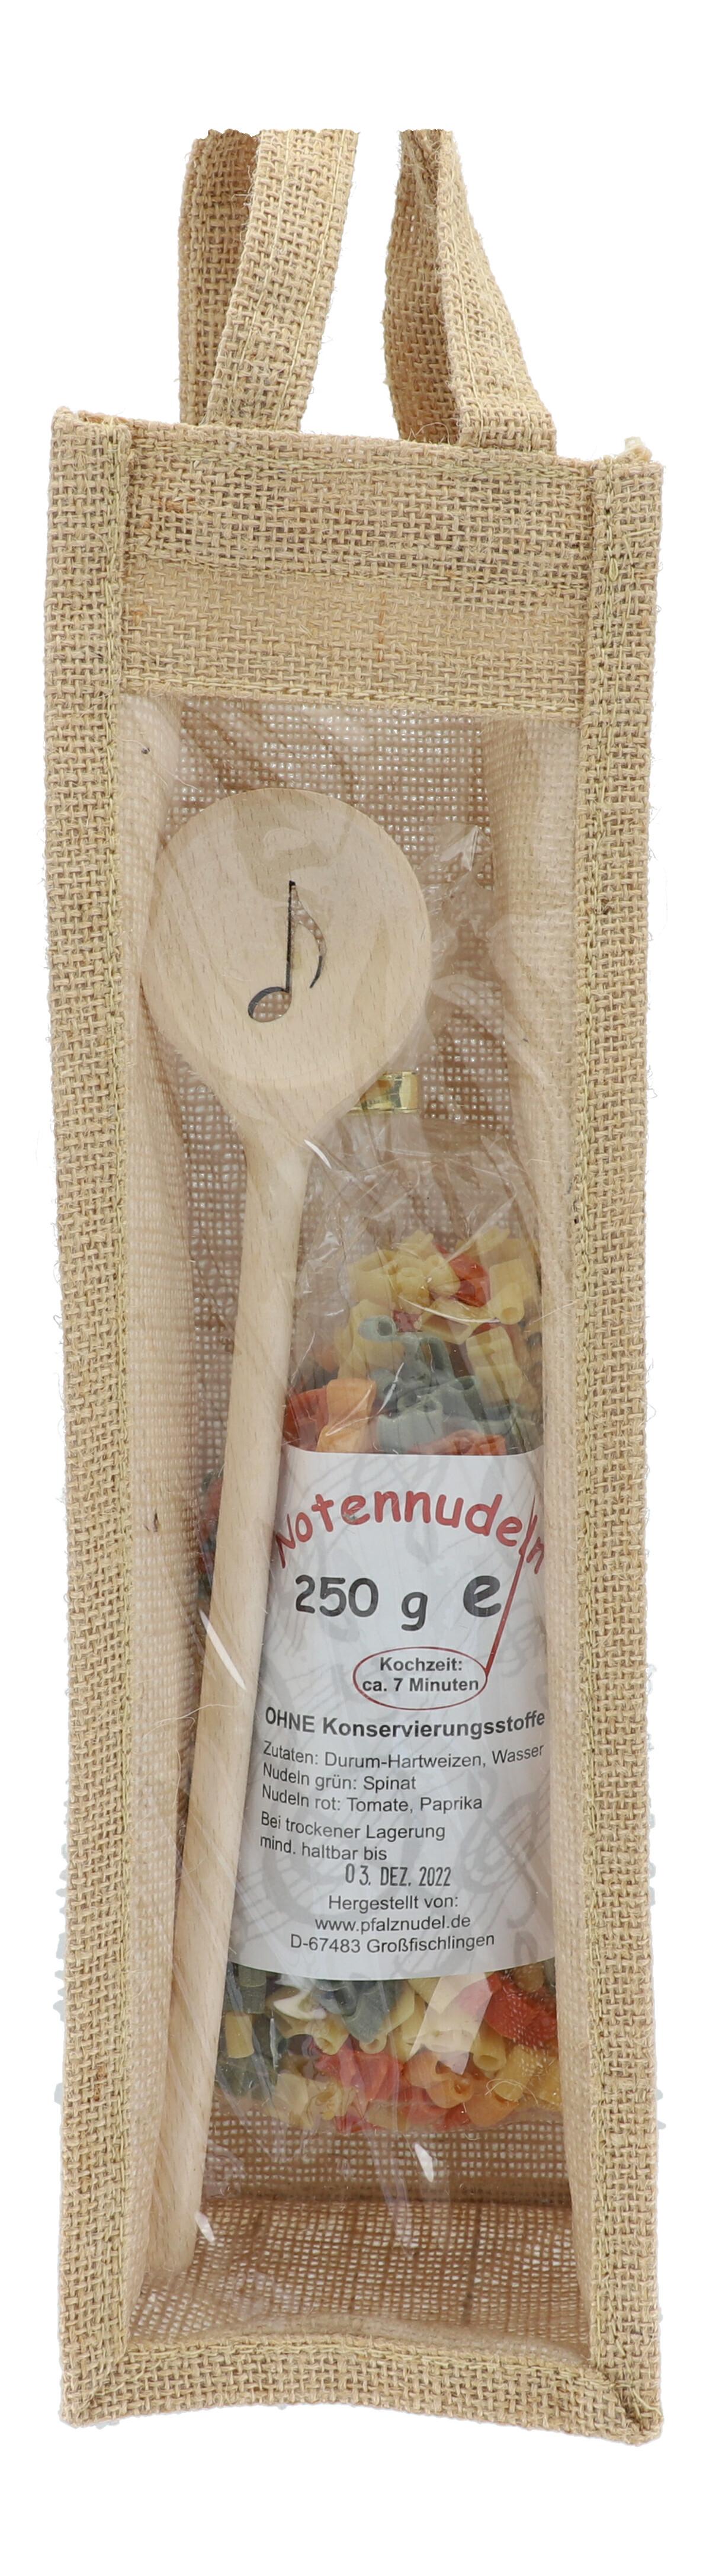 Gift set jute bag with noodles / wooden spoon eighth note